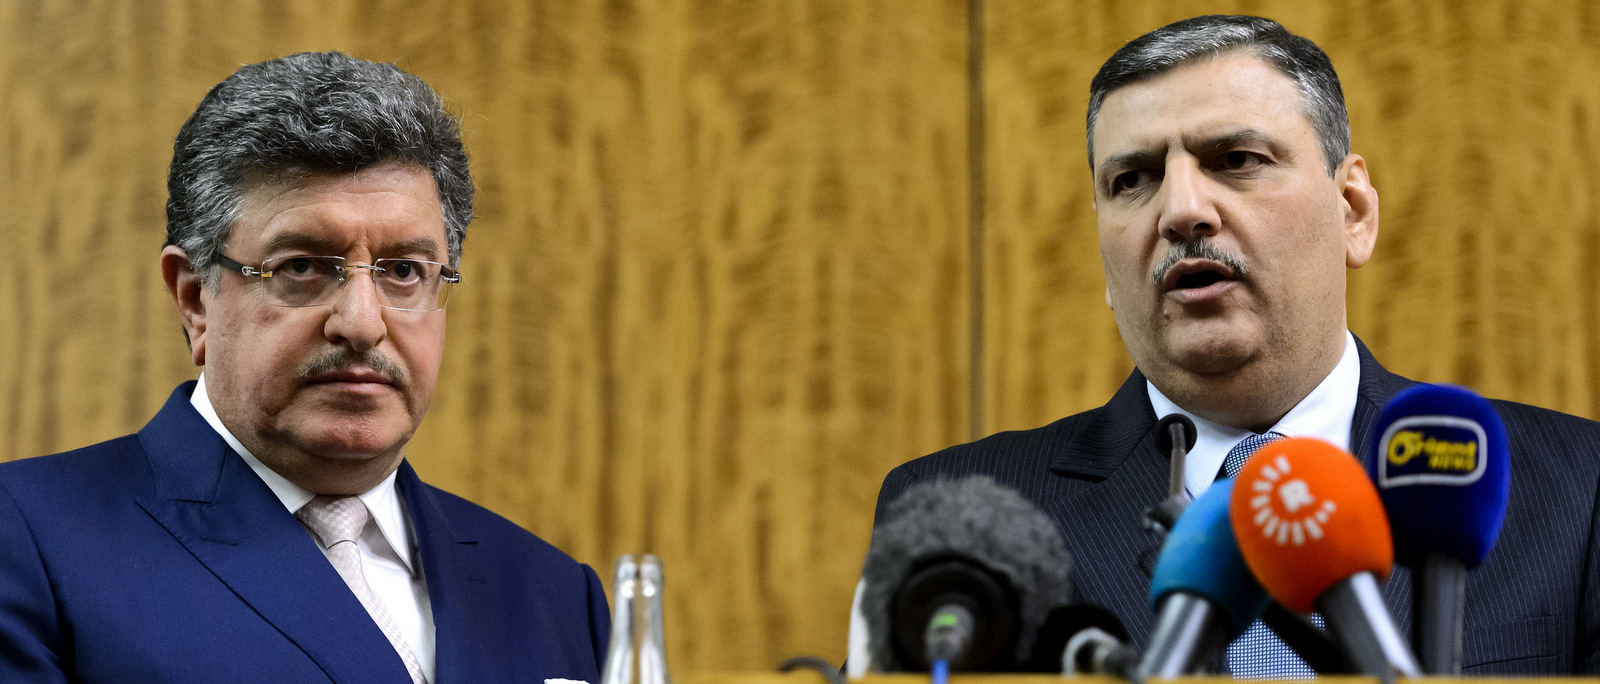 Syrian opposition chief Riad Hijab, right, standing next to High Negotiations Committee (HNC) spokesman Salem al-Meslet, left, as they attend a press conference after Syrian peace talks, at the President Wilson hotel in Geneva, Switzerland, Wednesday, Feb. 3, 2016. (Martial Trezzini/Keystone via AP)